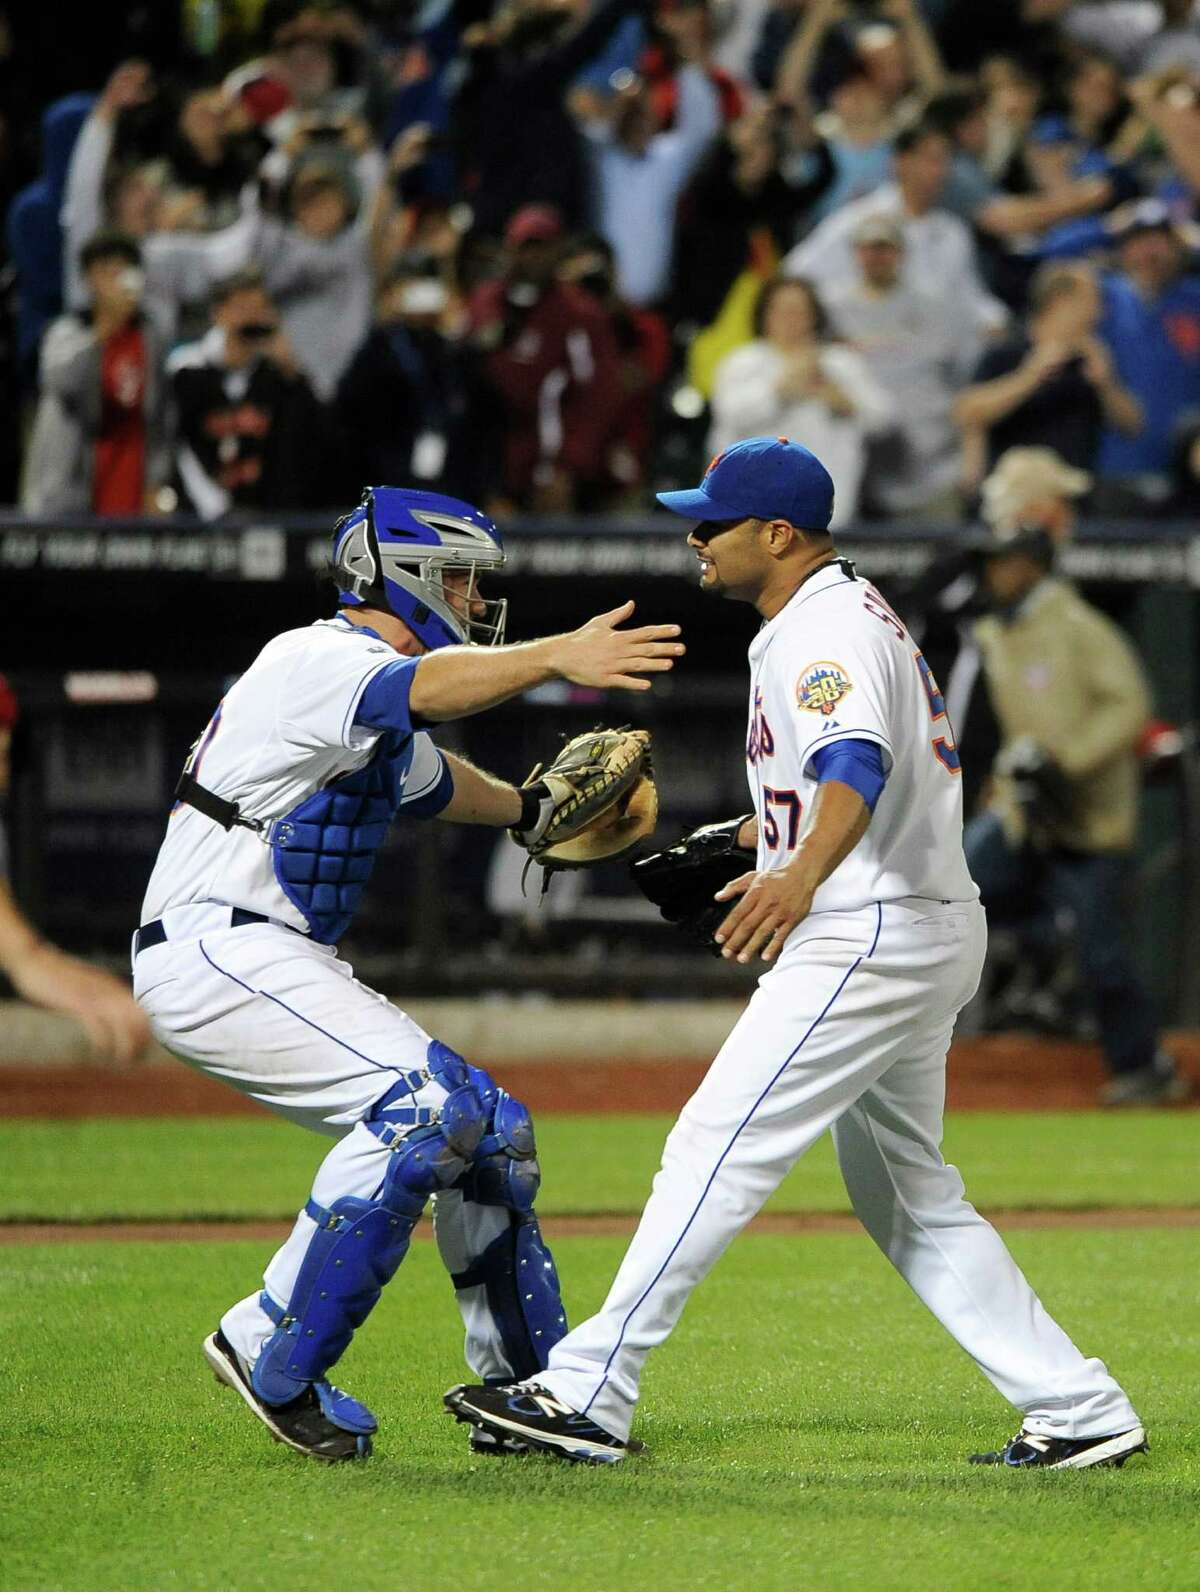 New York Mets catcher Josh Thole, left, runs to hug starting pitcher Johan Santana who threw a no-hitter against the St. Louis Cardinals in a baseball game on Friday, June 1, 2012, at Citi Field in New York.